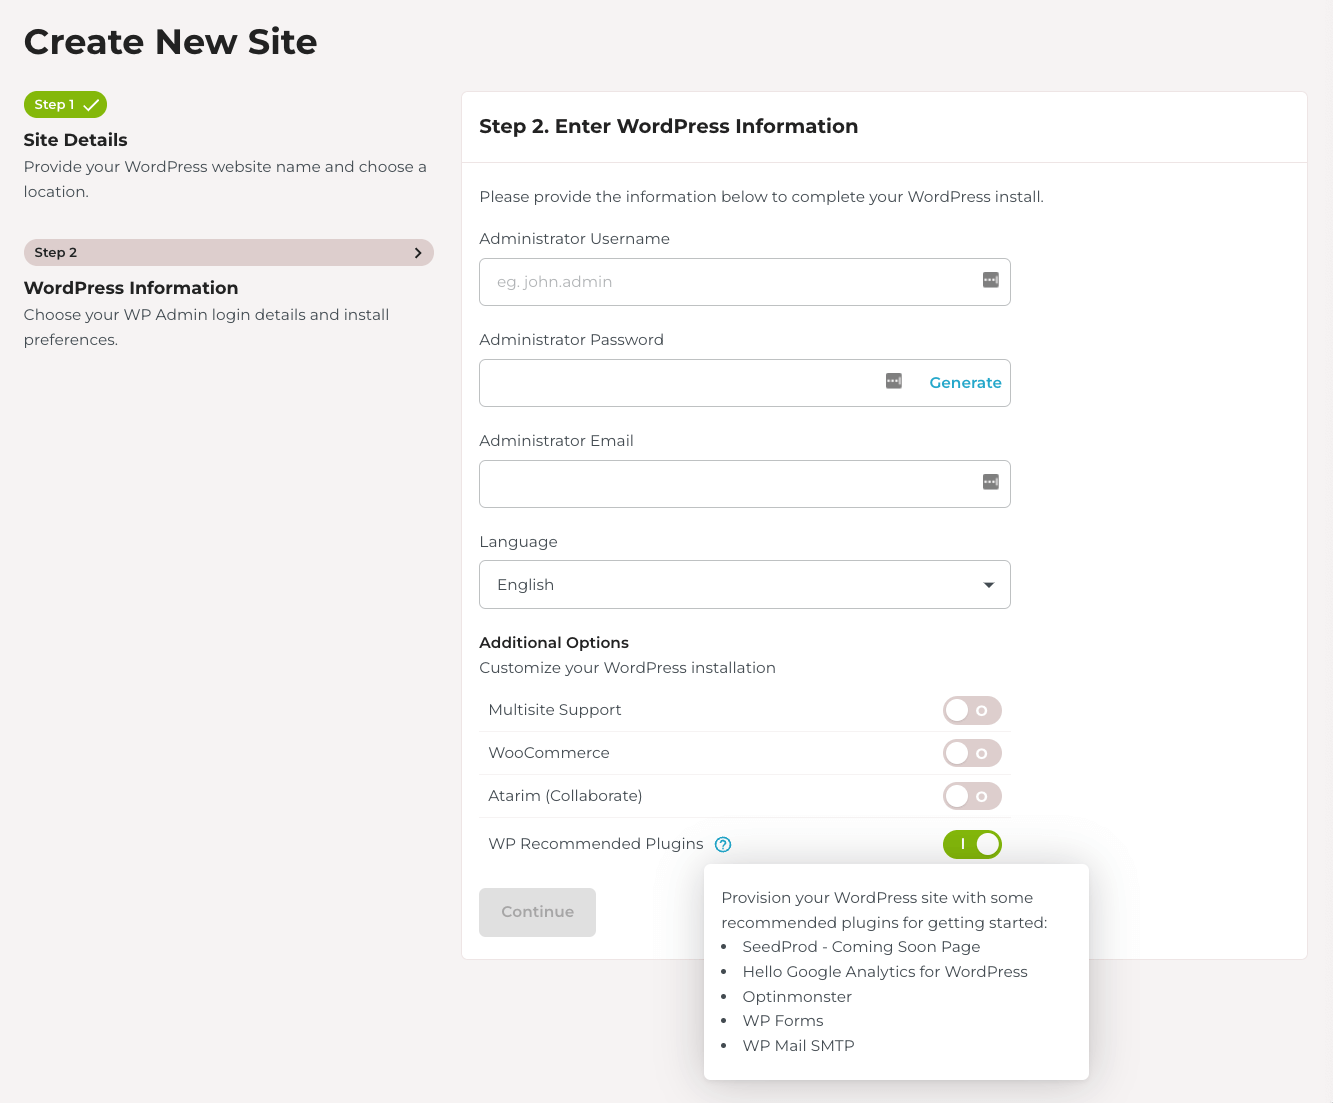 Rocket.net review: step 2 of installing a site